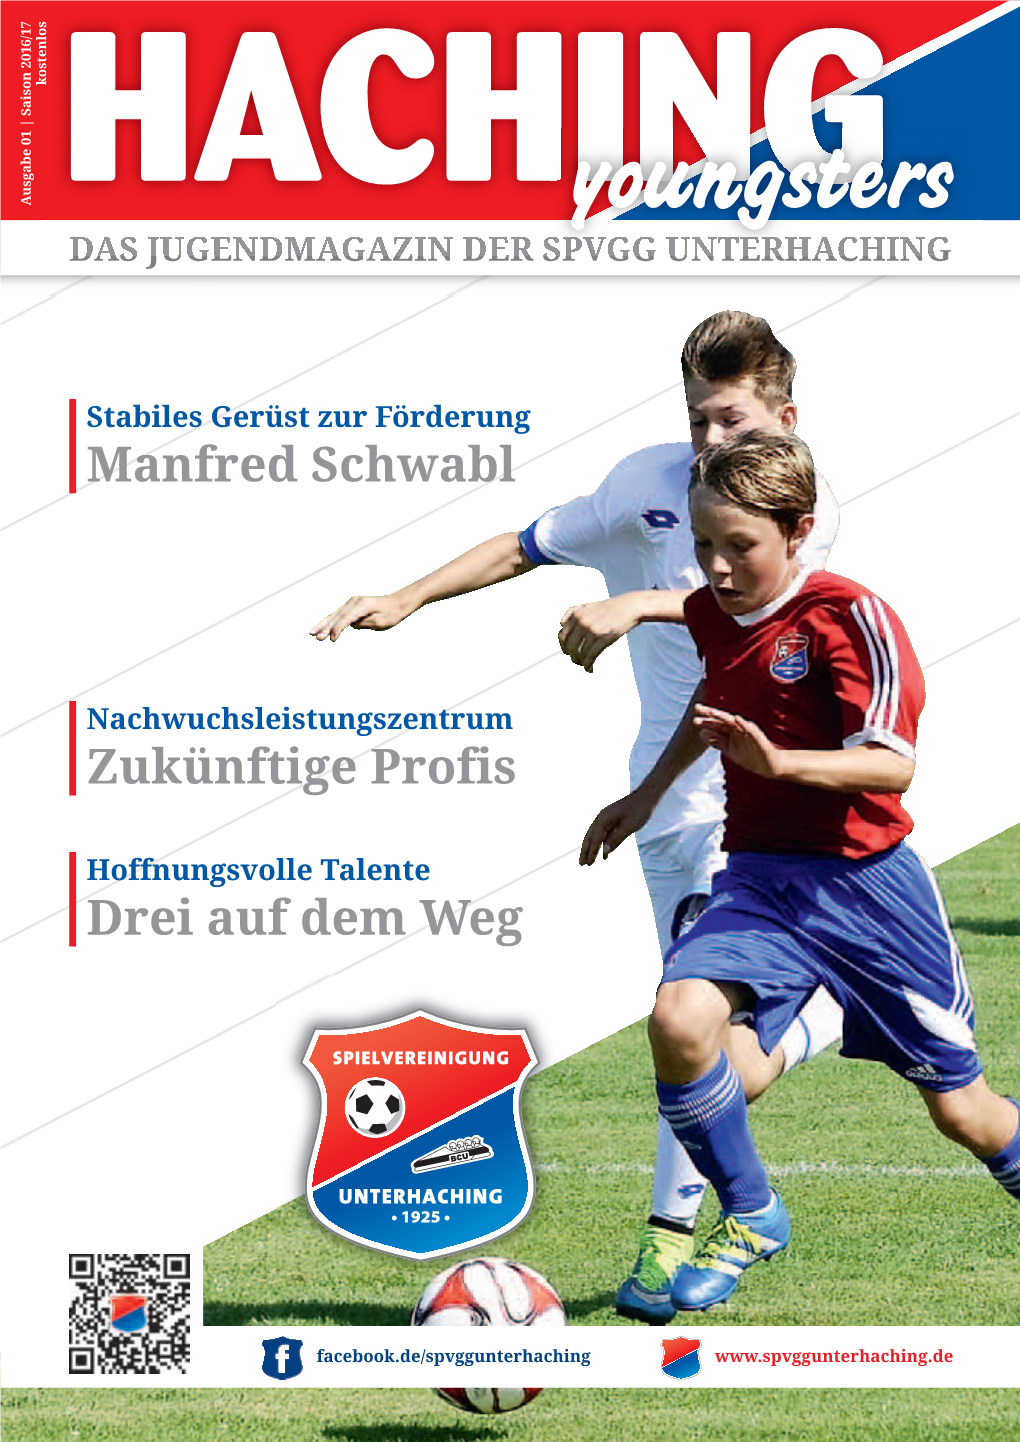 Spvgg Unterhaching "Haching Youngsters" 2016-2017 Nr. 01